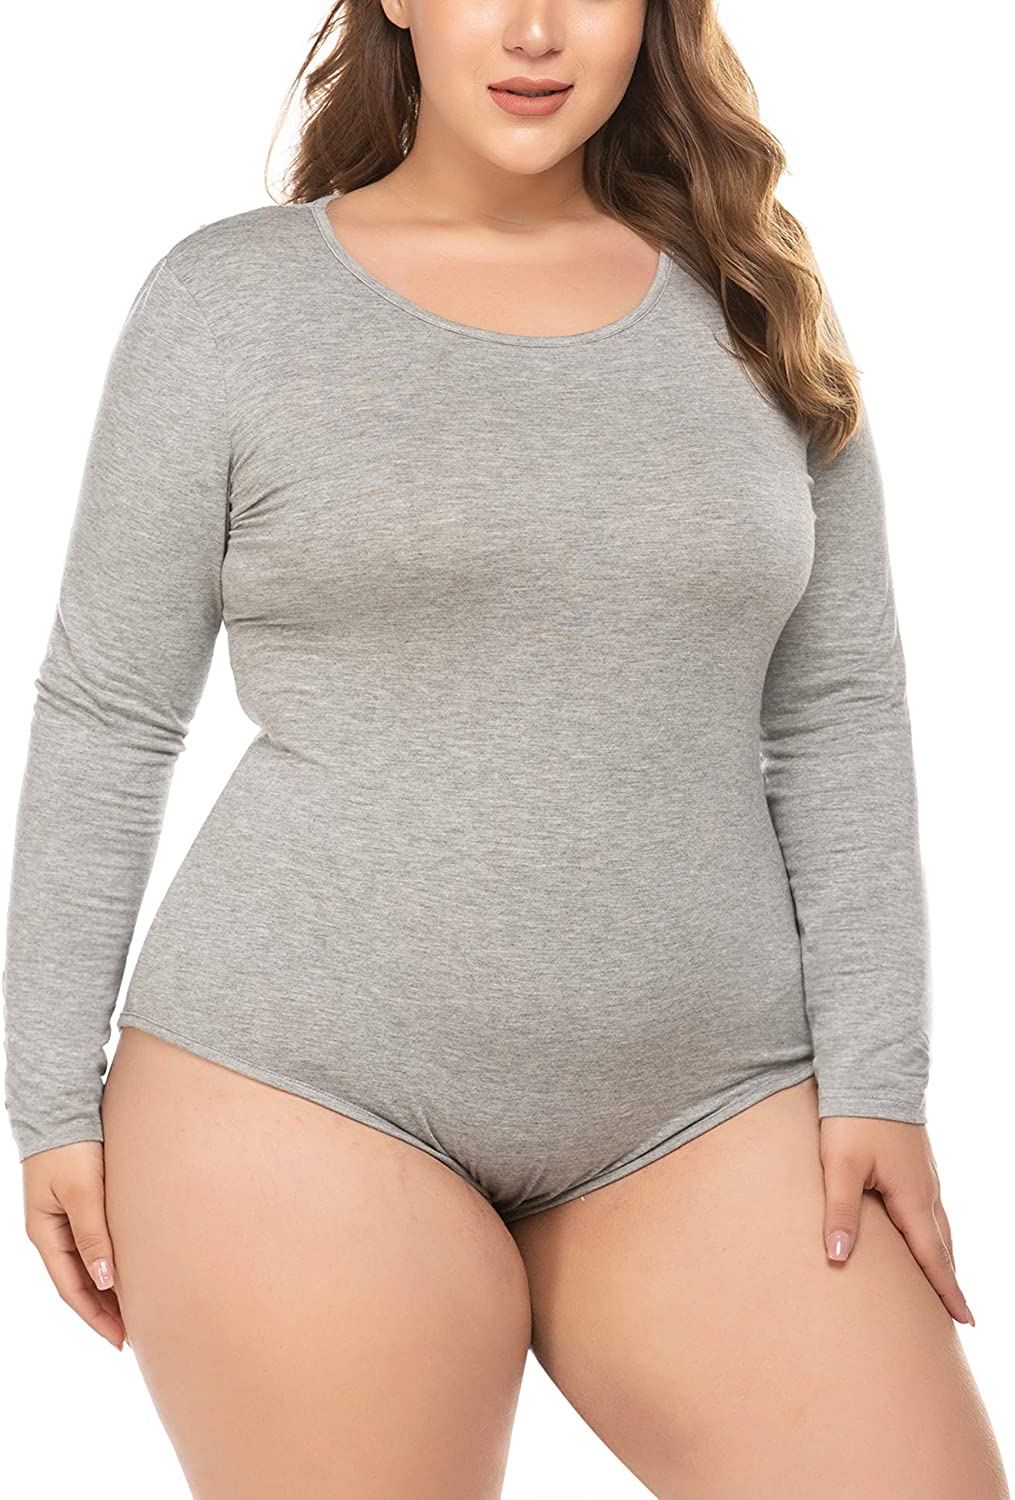 IN'VOLAND Womens Plus Size Bodysuit Long Sleeve Stretchy Leotard Scoop Neck  Top